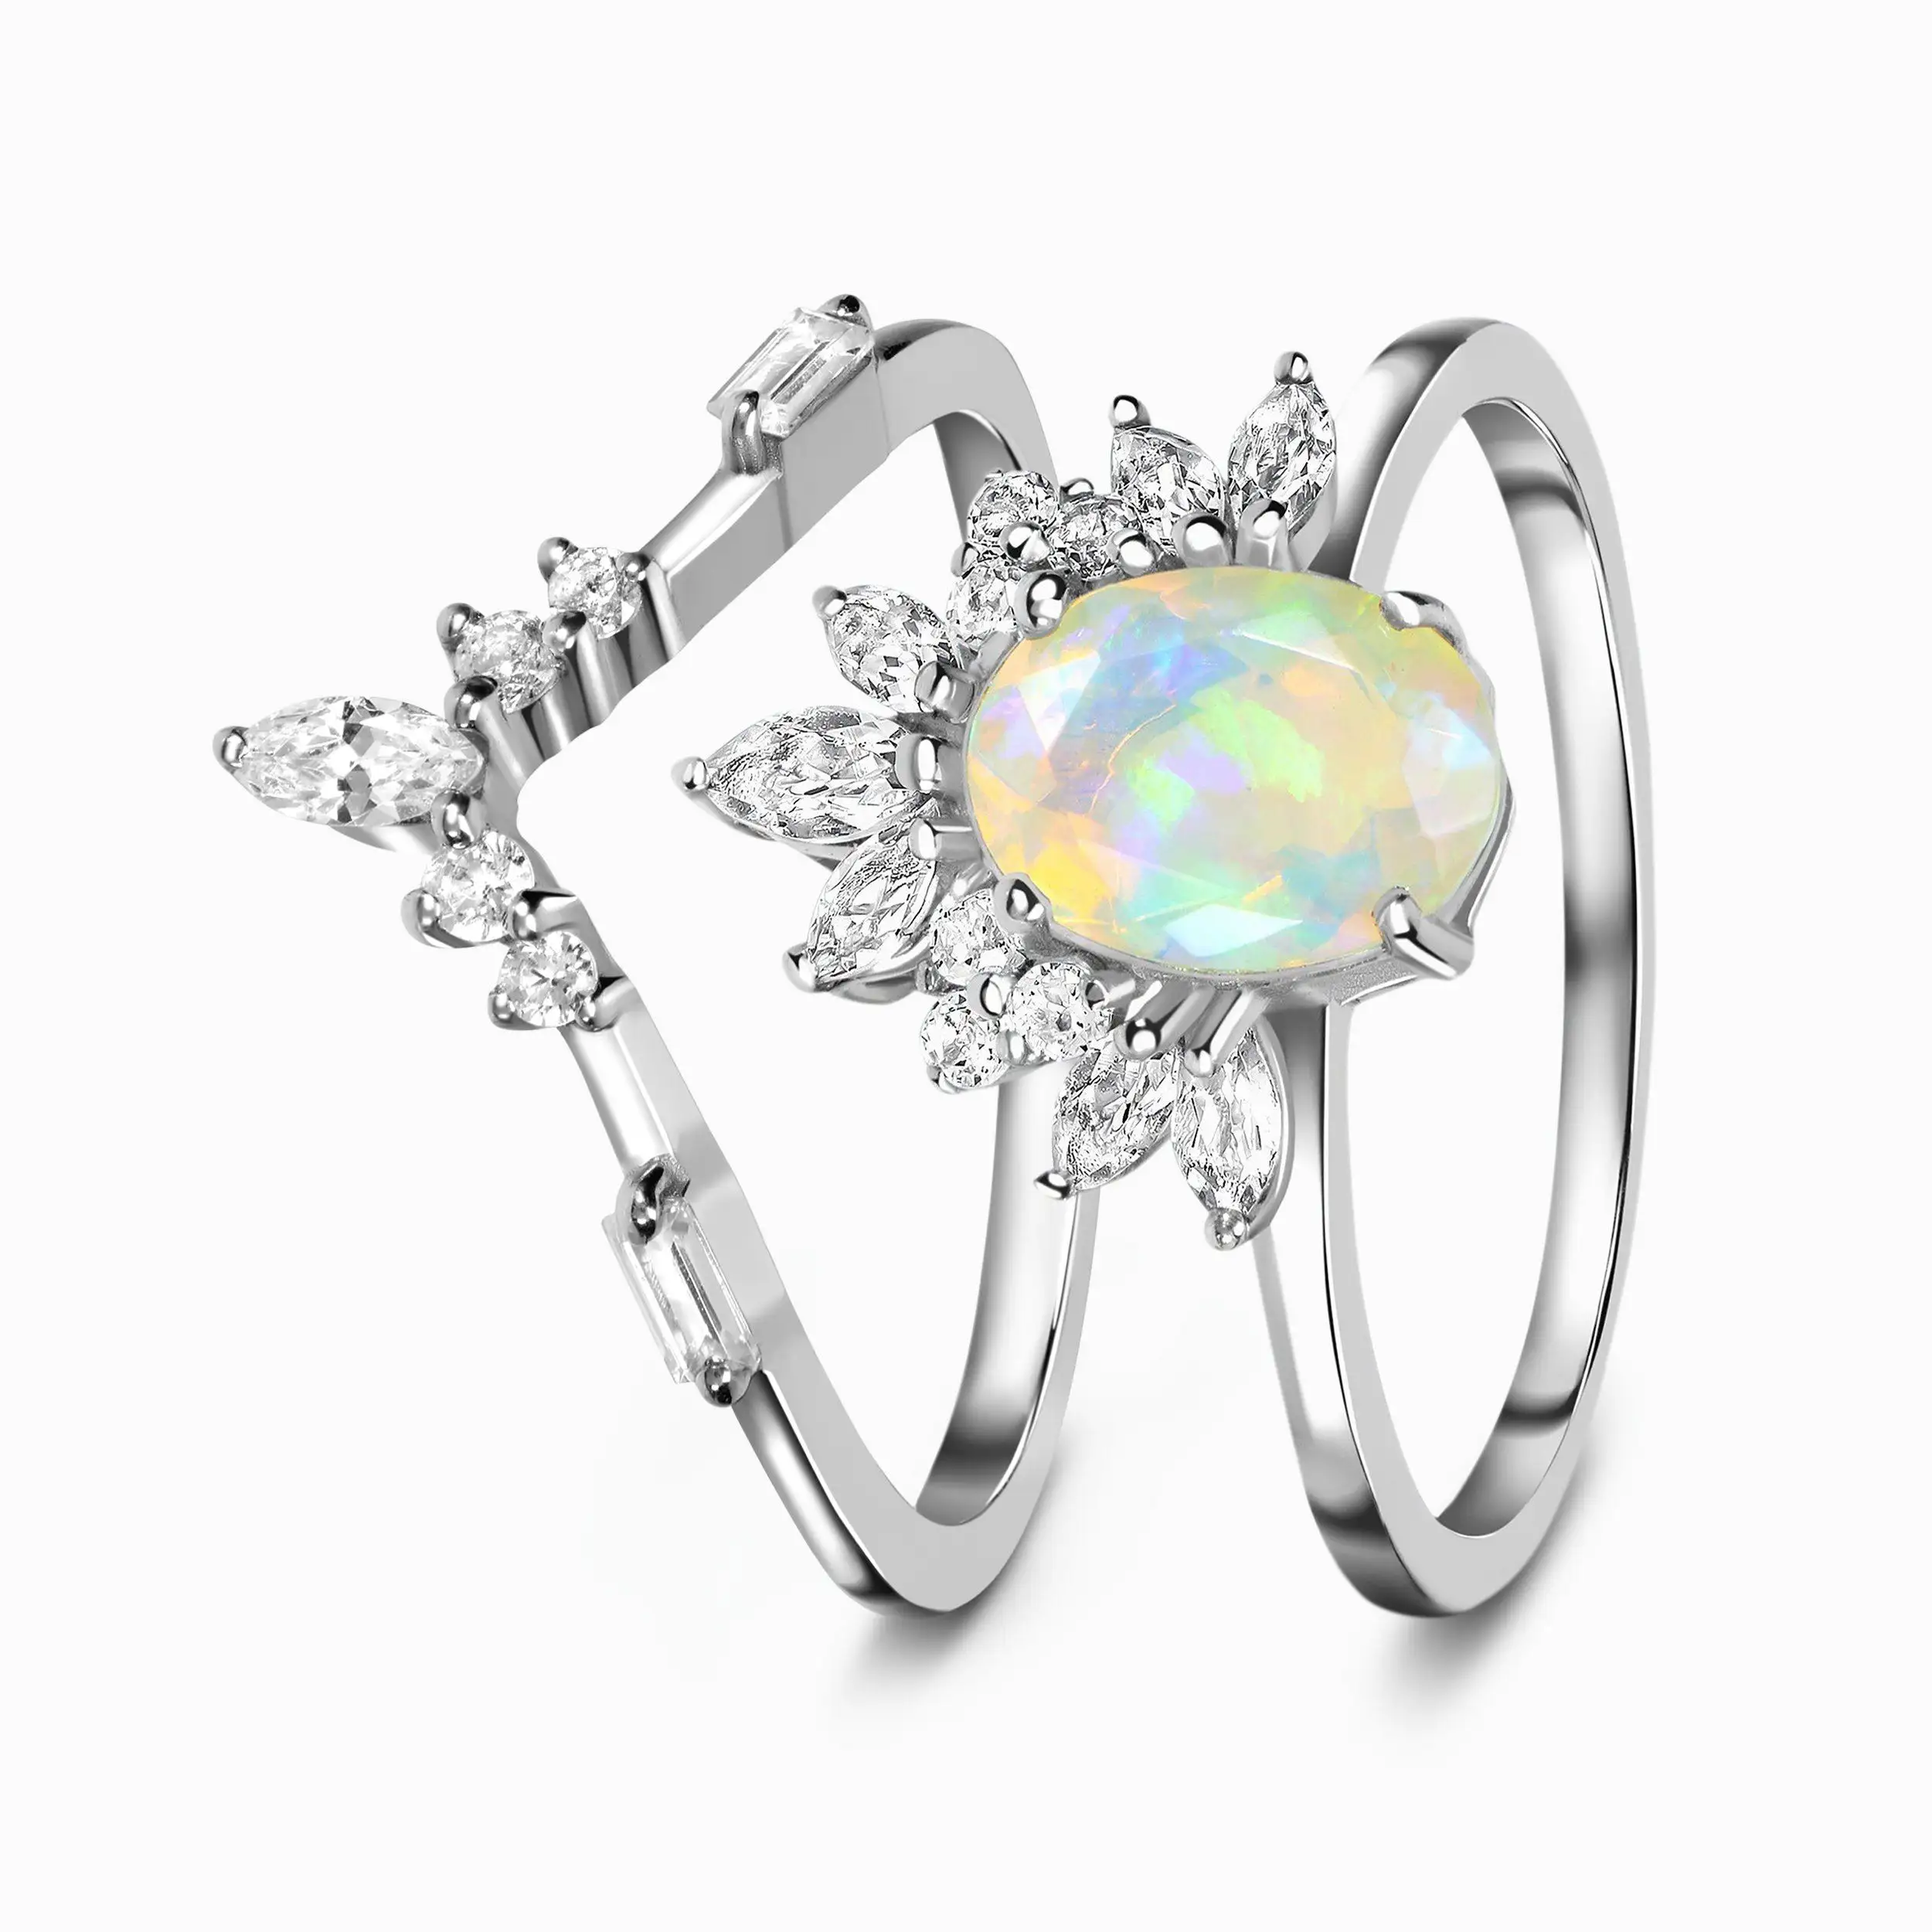 Natural Quartz Stone Jewelry 925 Sterling Silver Natural Opal Jewelry White Topaz Faceted Opal Ring Set